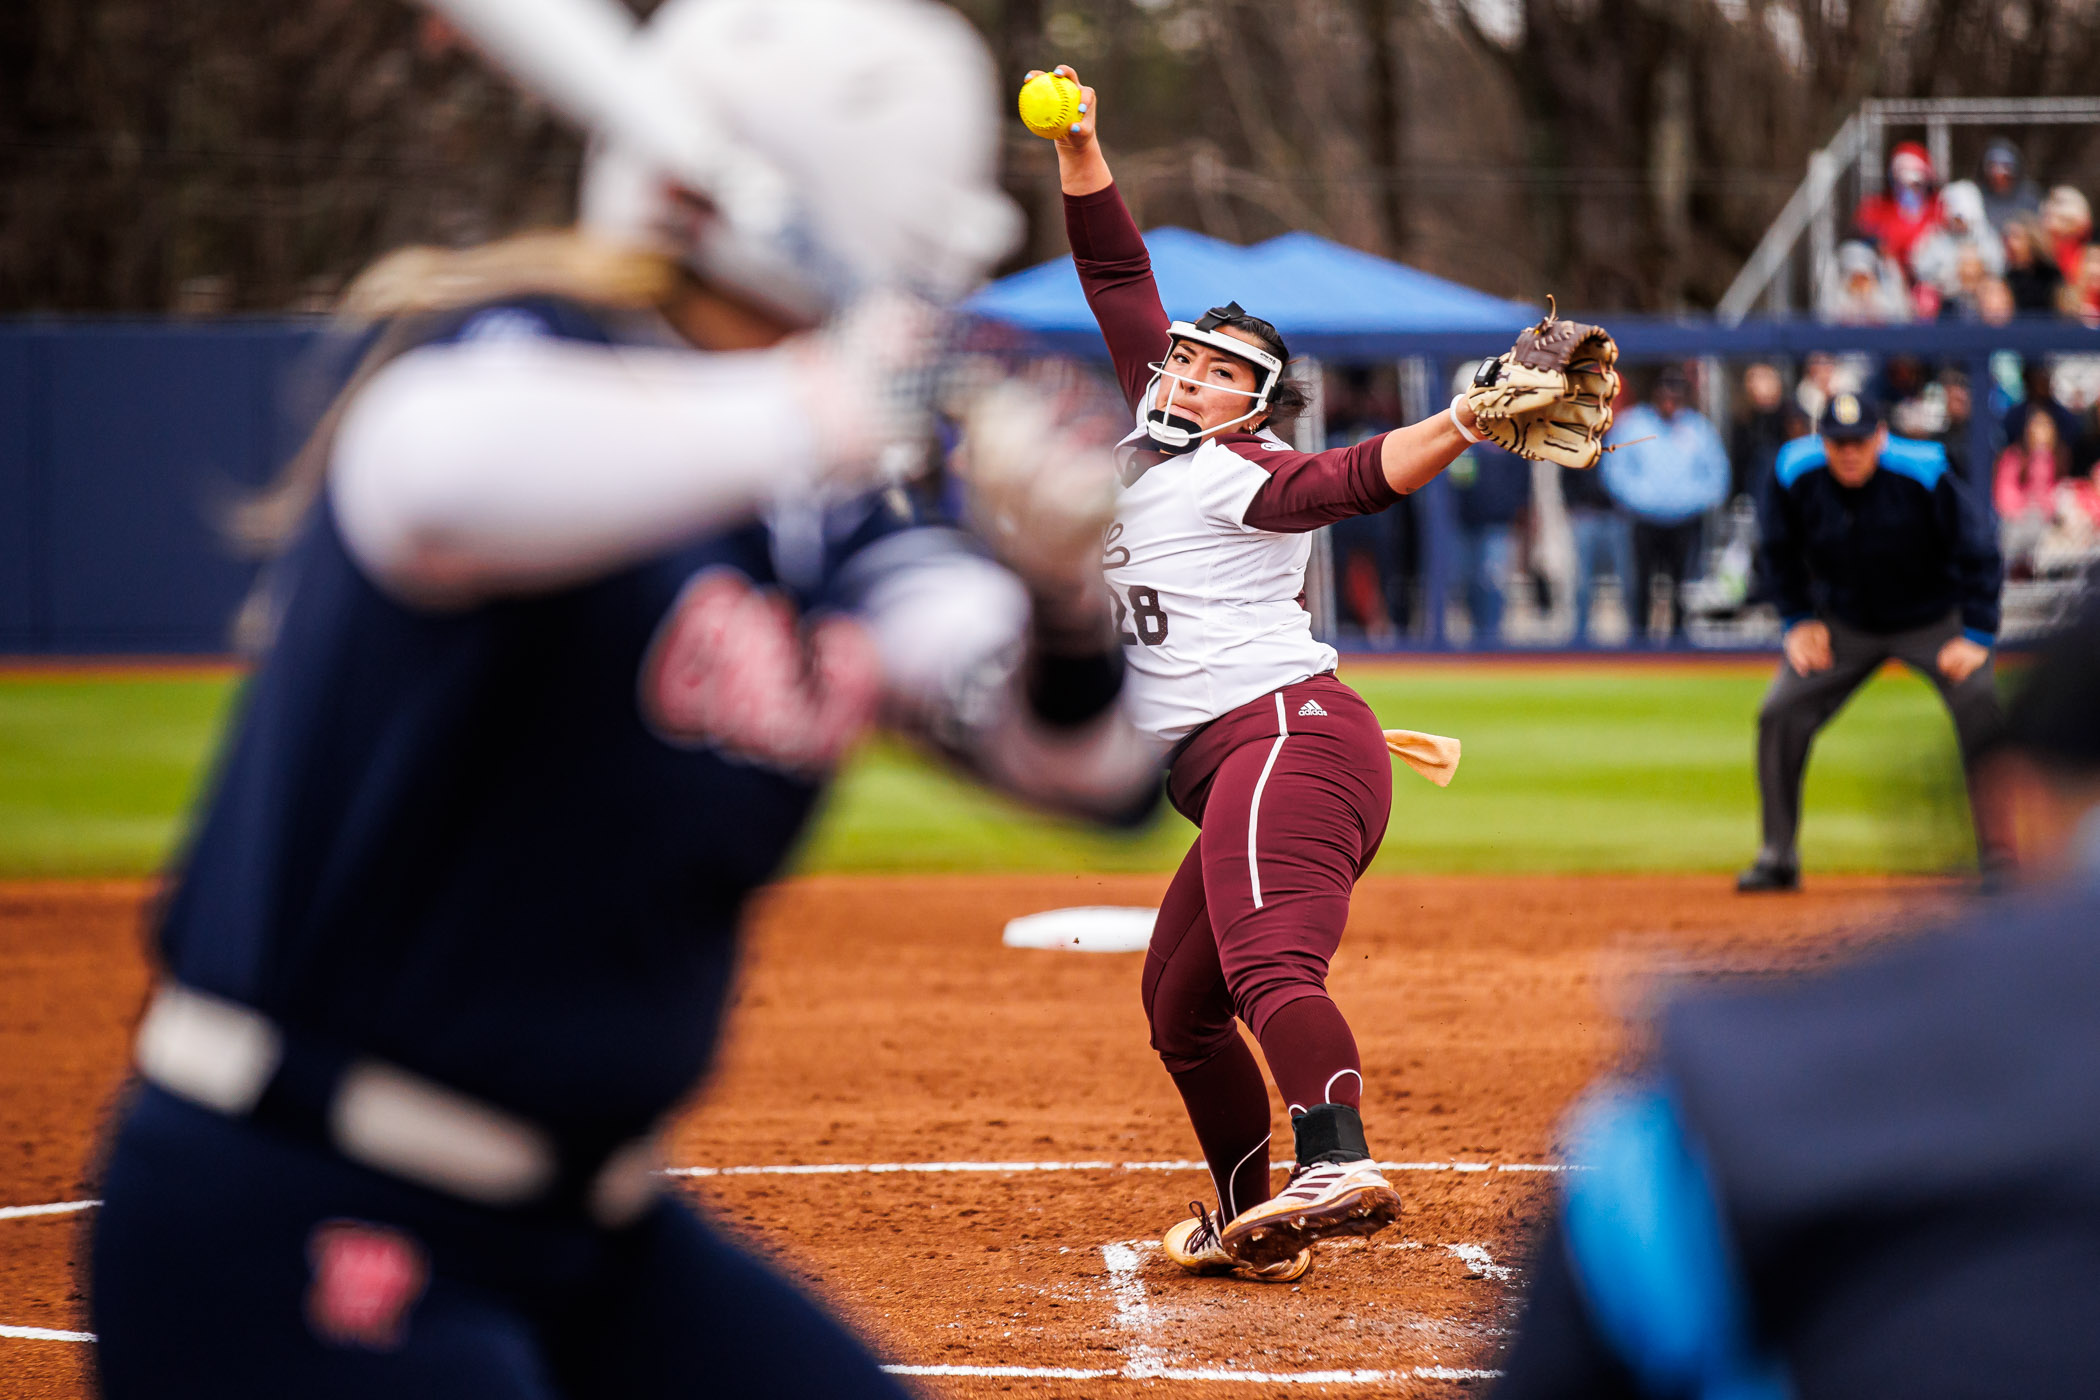 MSU softball pitcher Aspen Wesley prepares to throw a pitch against Ole Miss